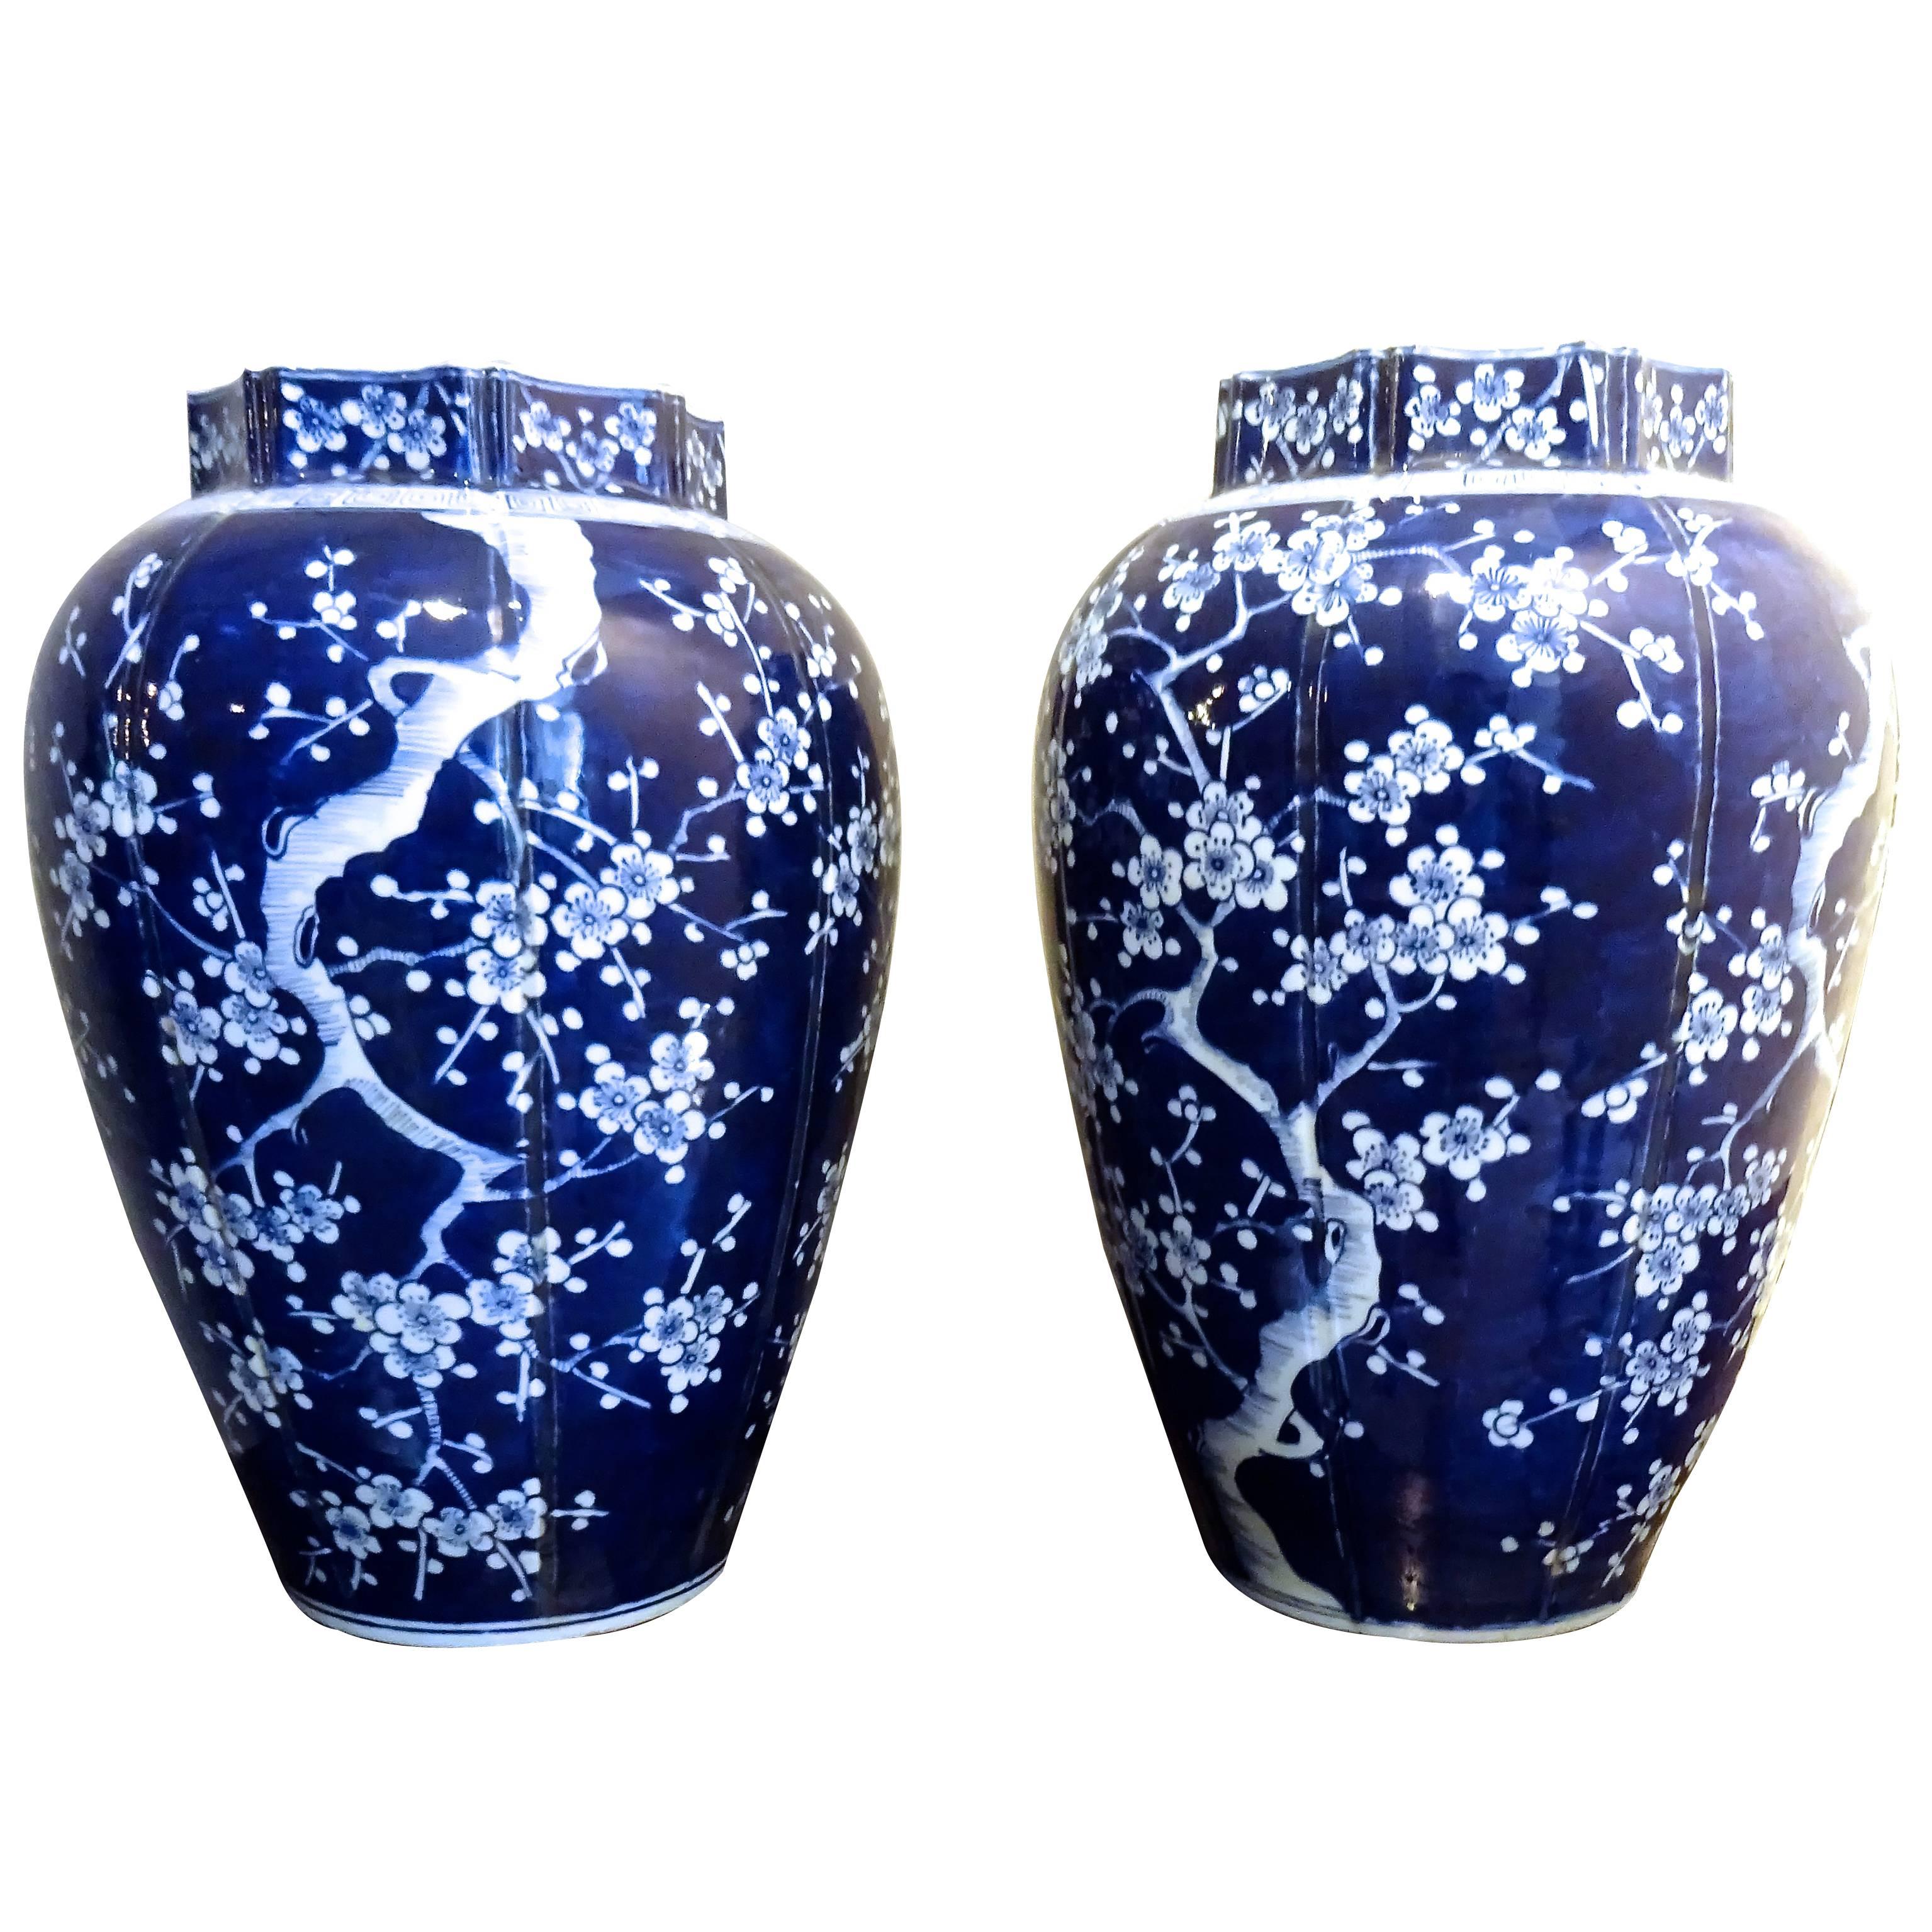 Large Pair of Chinese Blue and White Porcelain Vases with Plum Blossom Motif